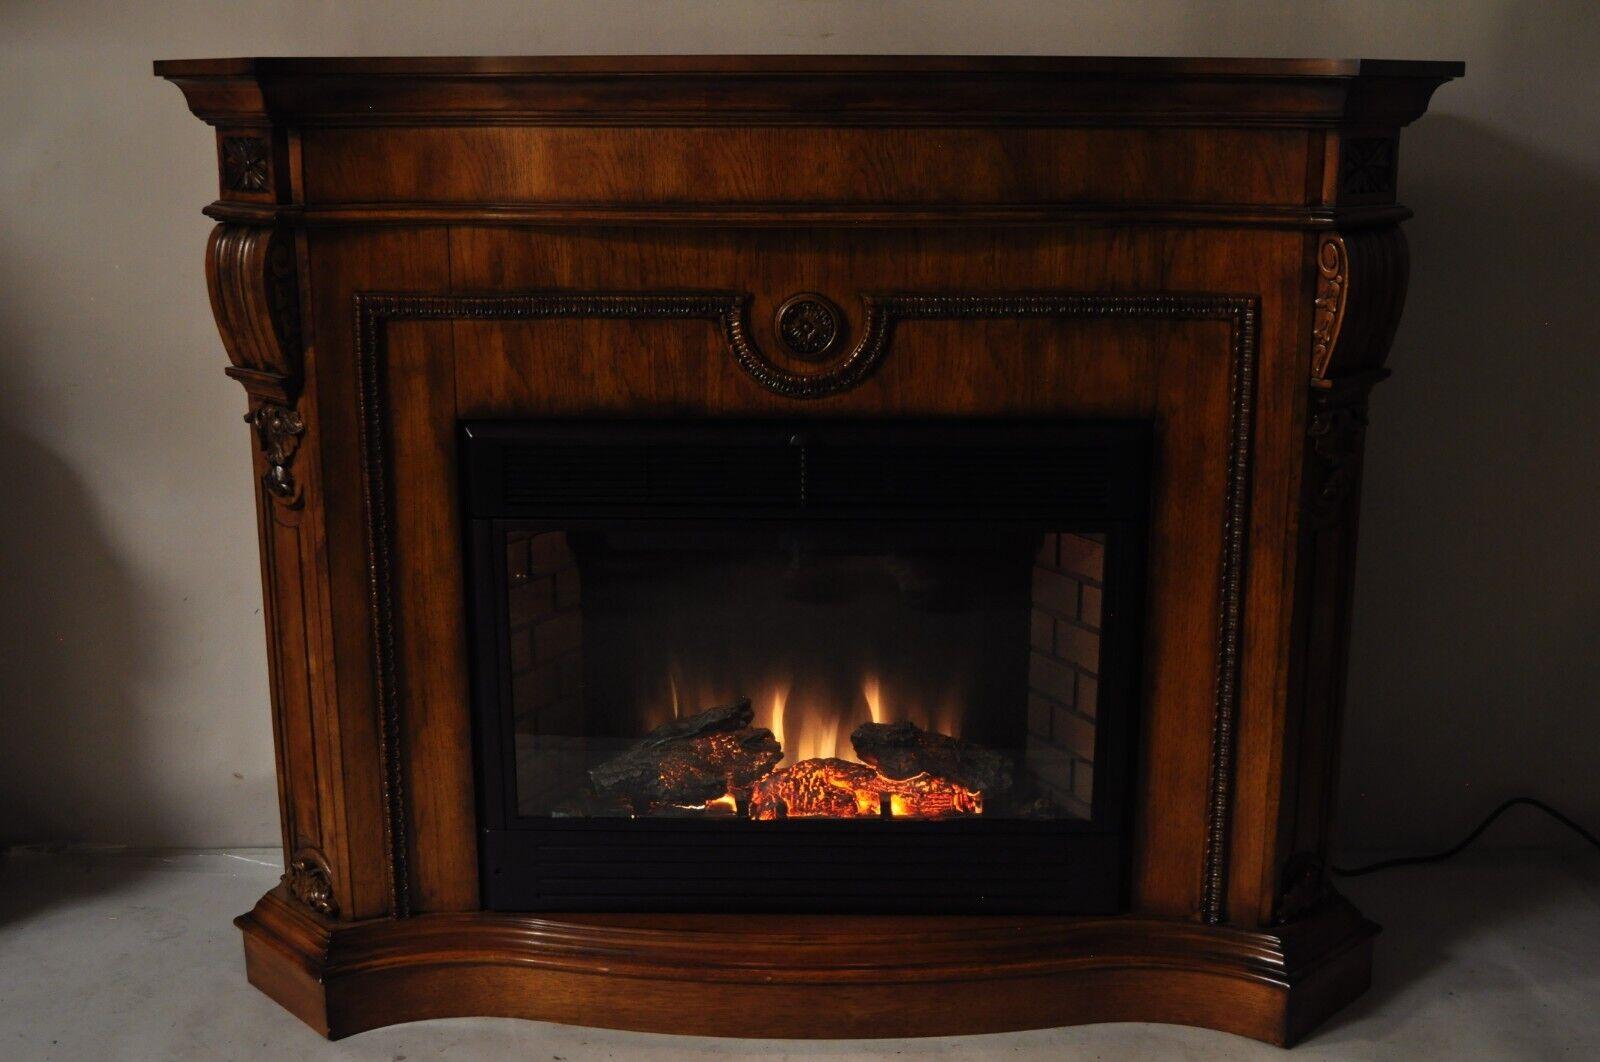 Heavy solid wood construction, nicely carved details, working heater and lighted fireplace with various settings, large impressive size, great style and form. Circa 21st Century, Pre-owned. Measurements: 48